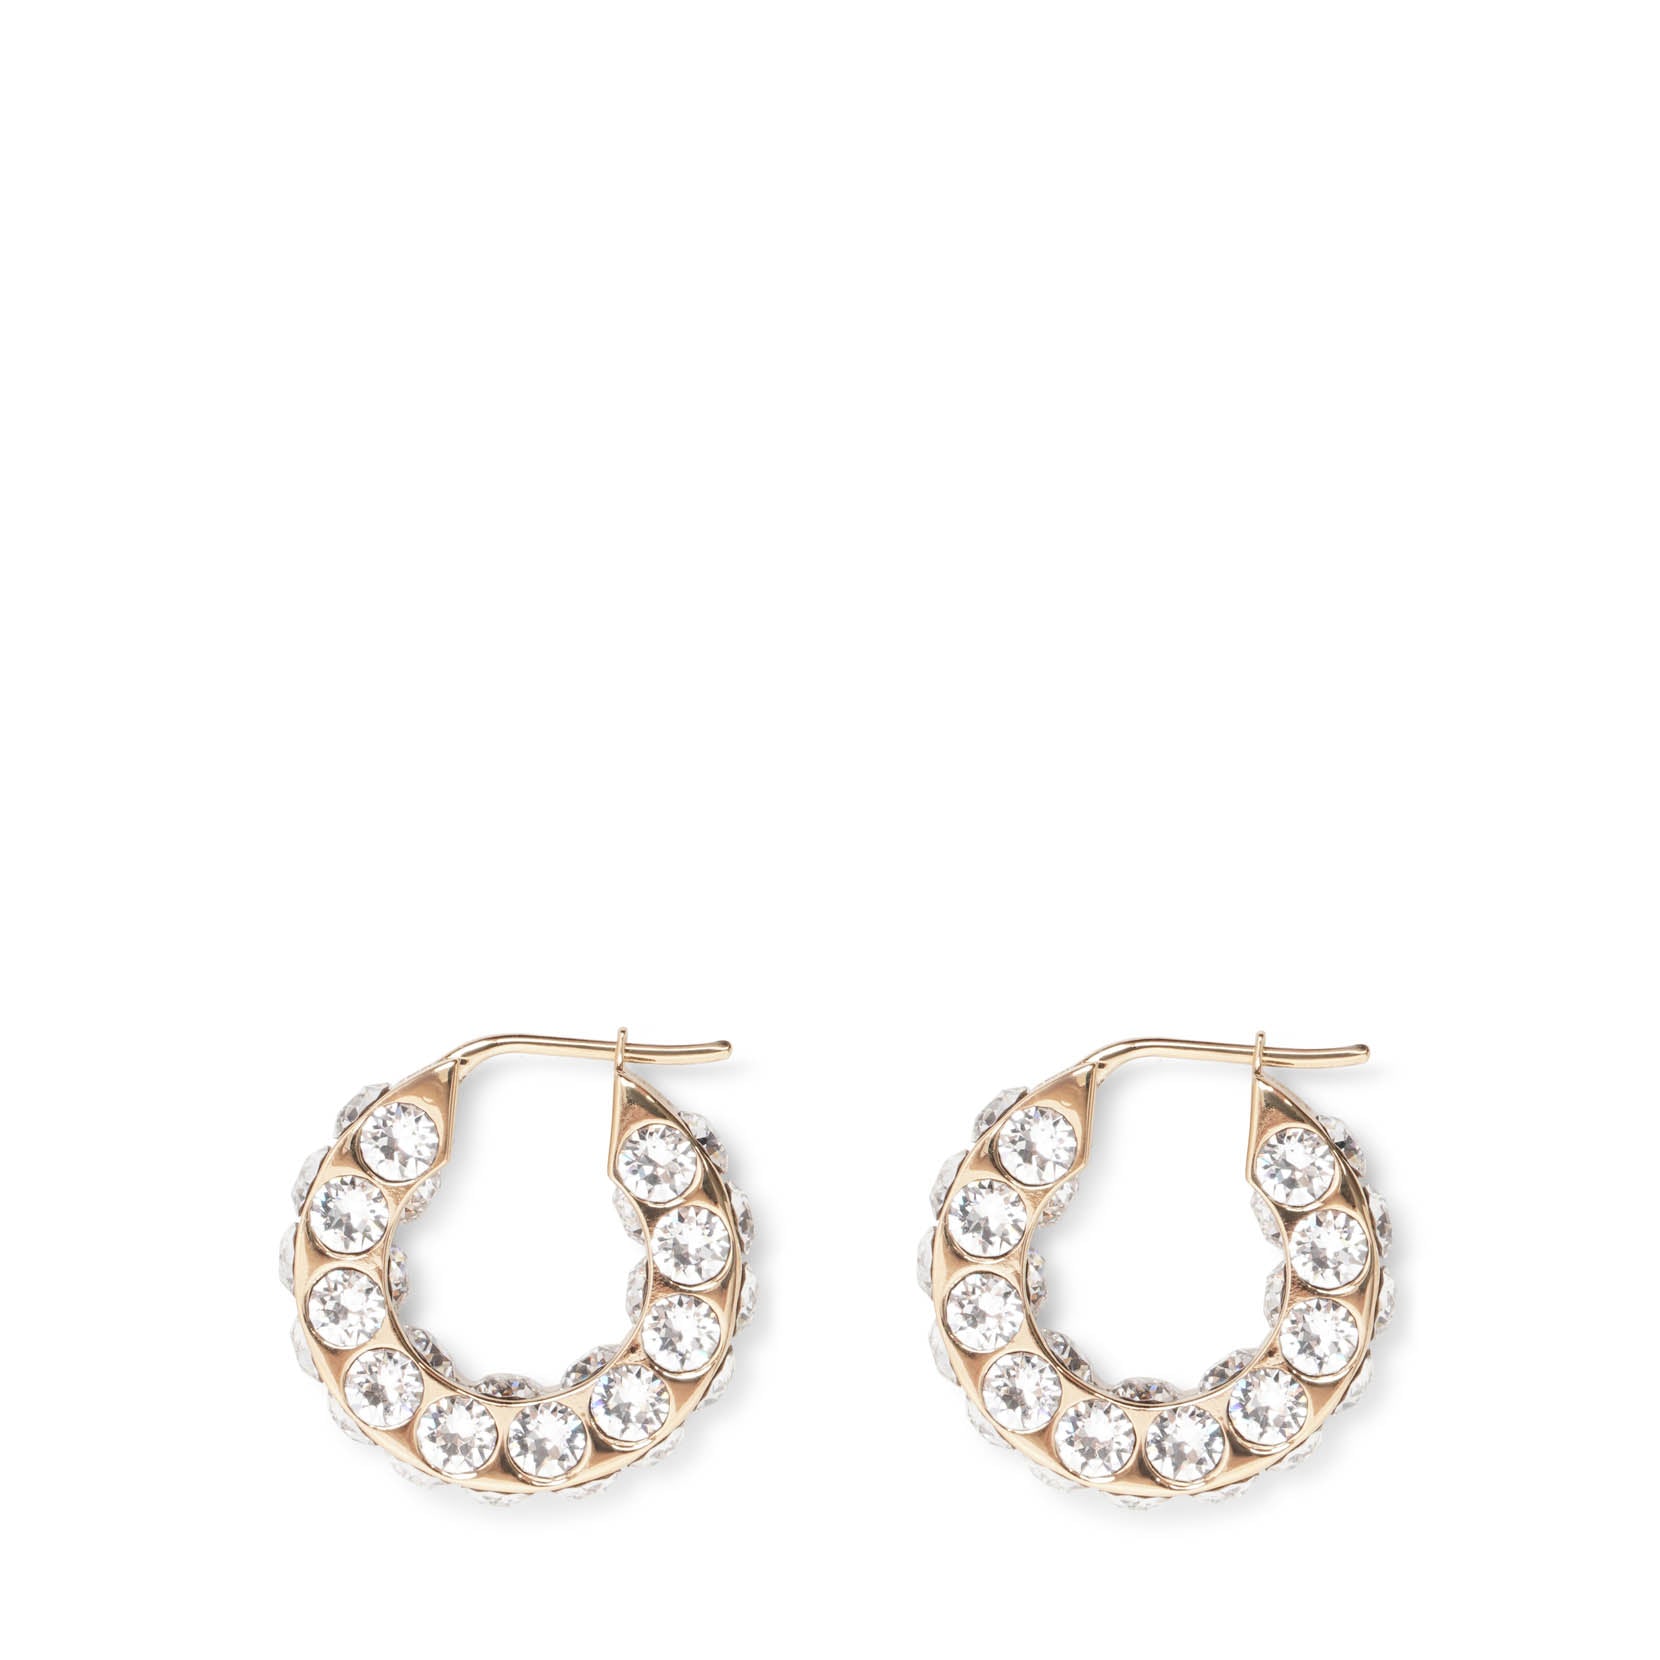 Amina Muaddi Jah Hoop Small White And Gold Crystal Earrings